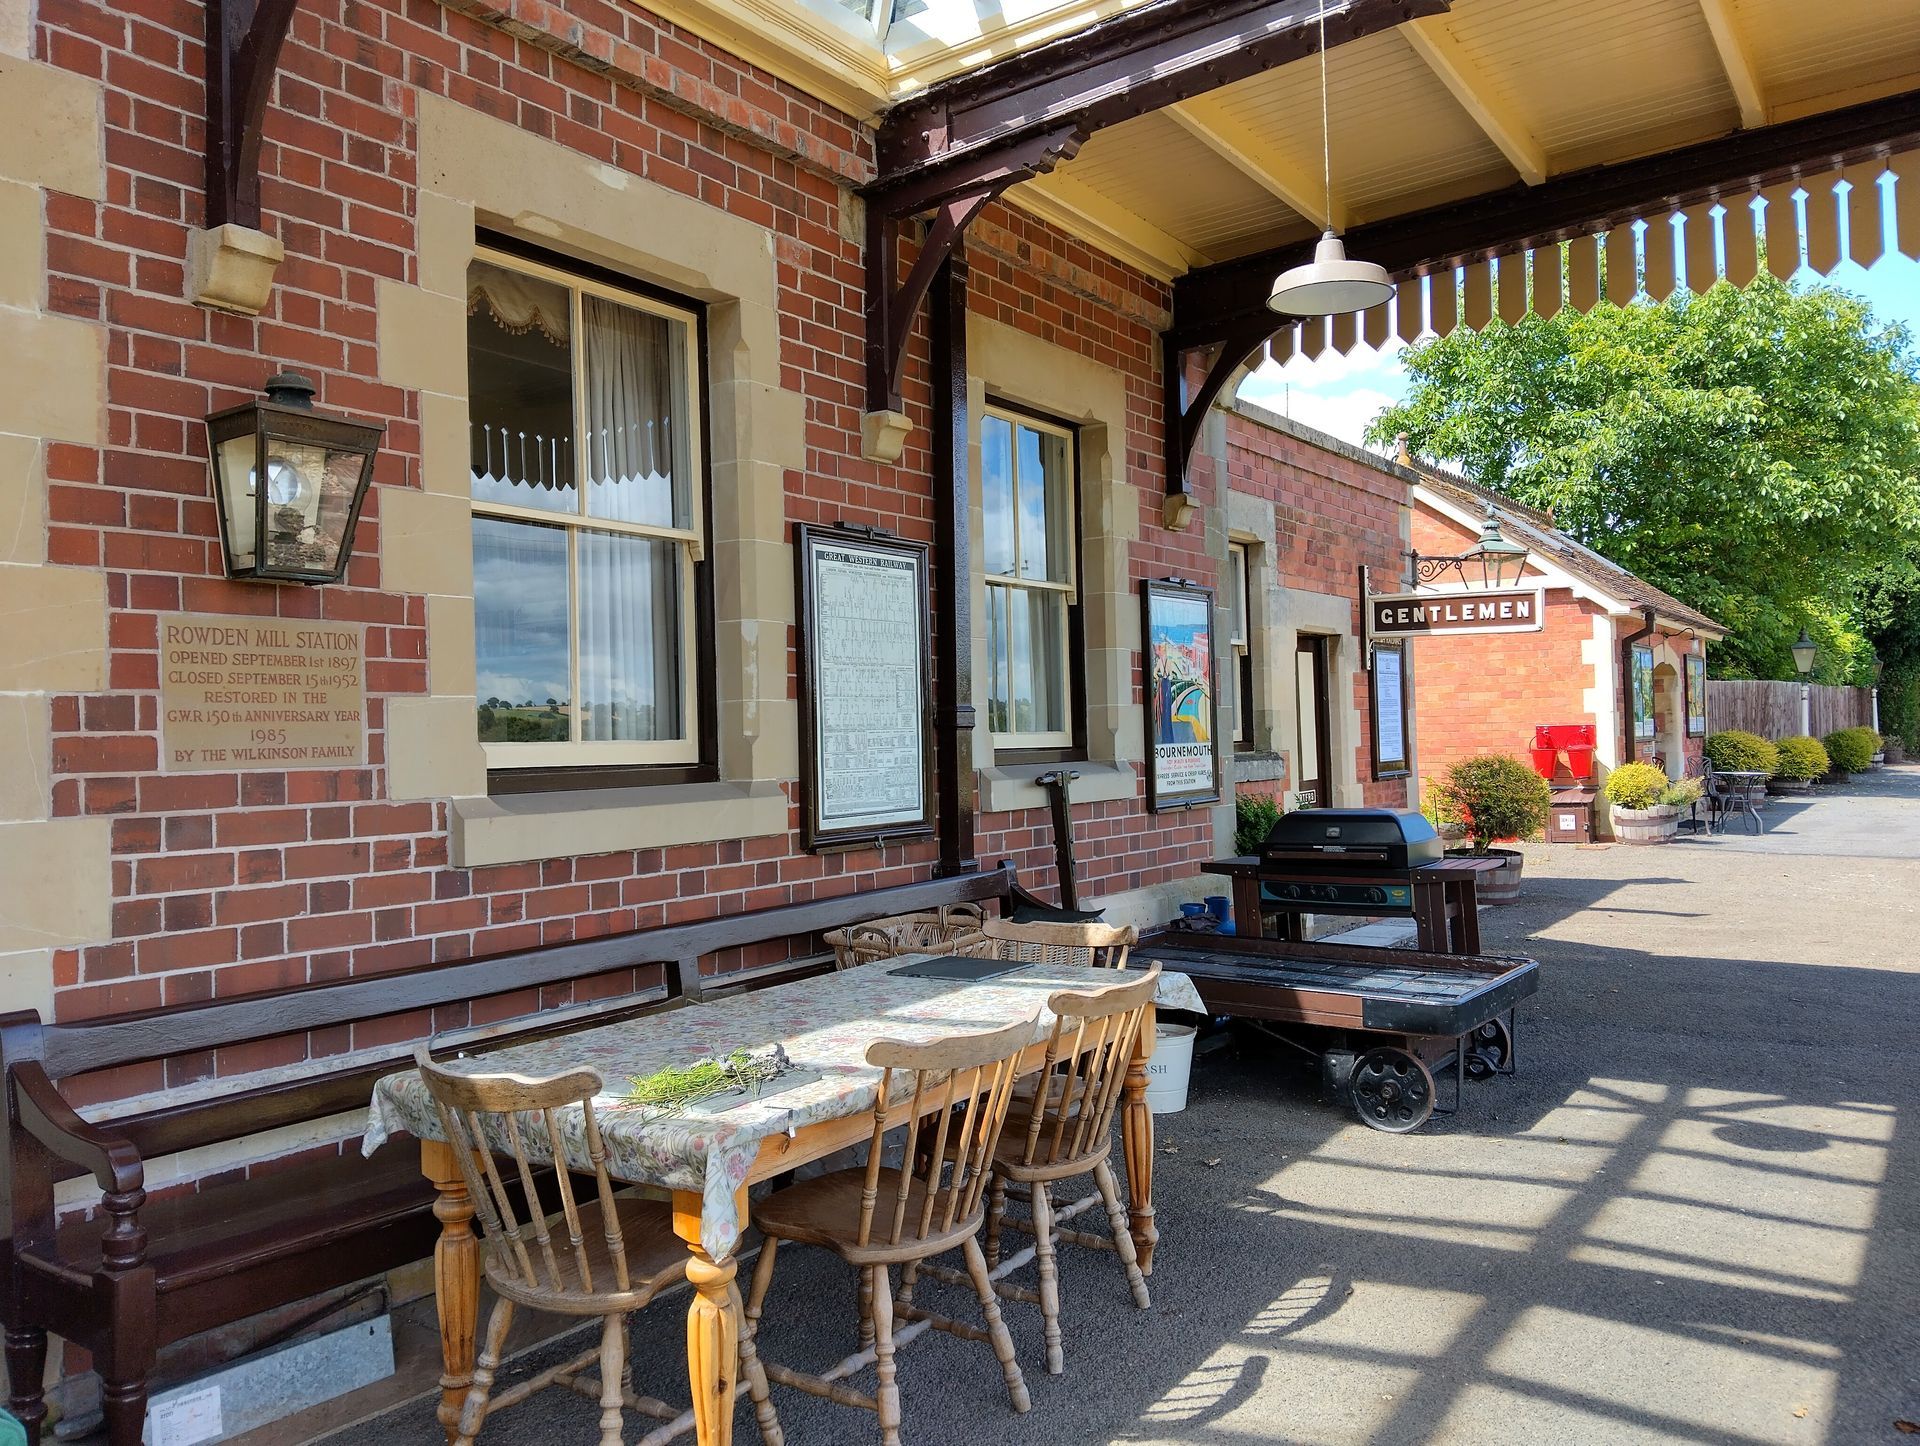 View of the table and chairs under the station's canopy, perfect for alfresco dining.